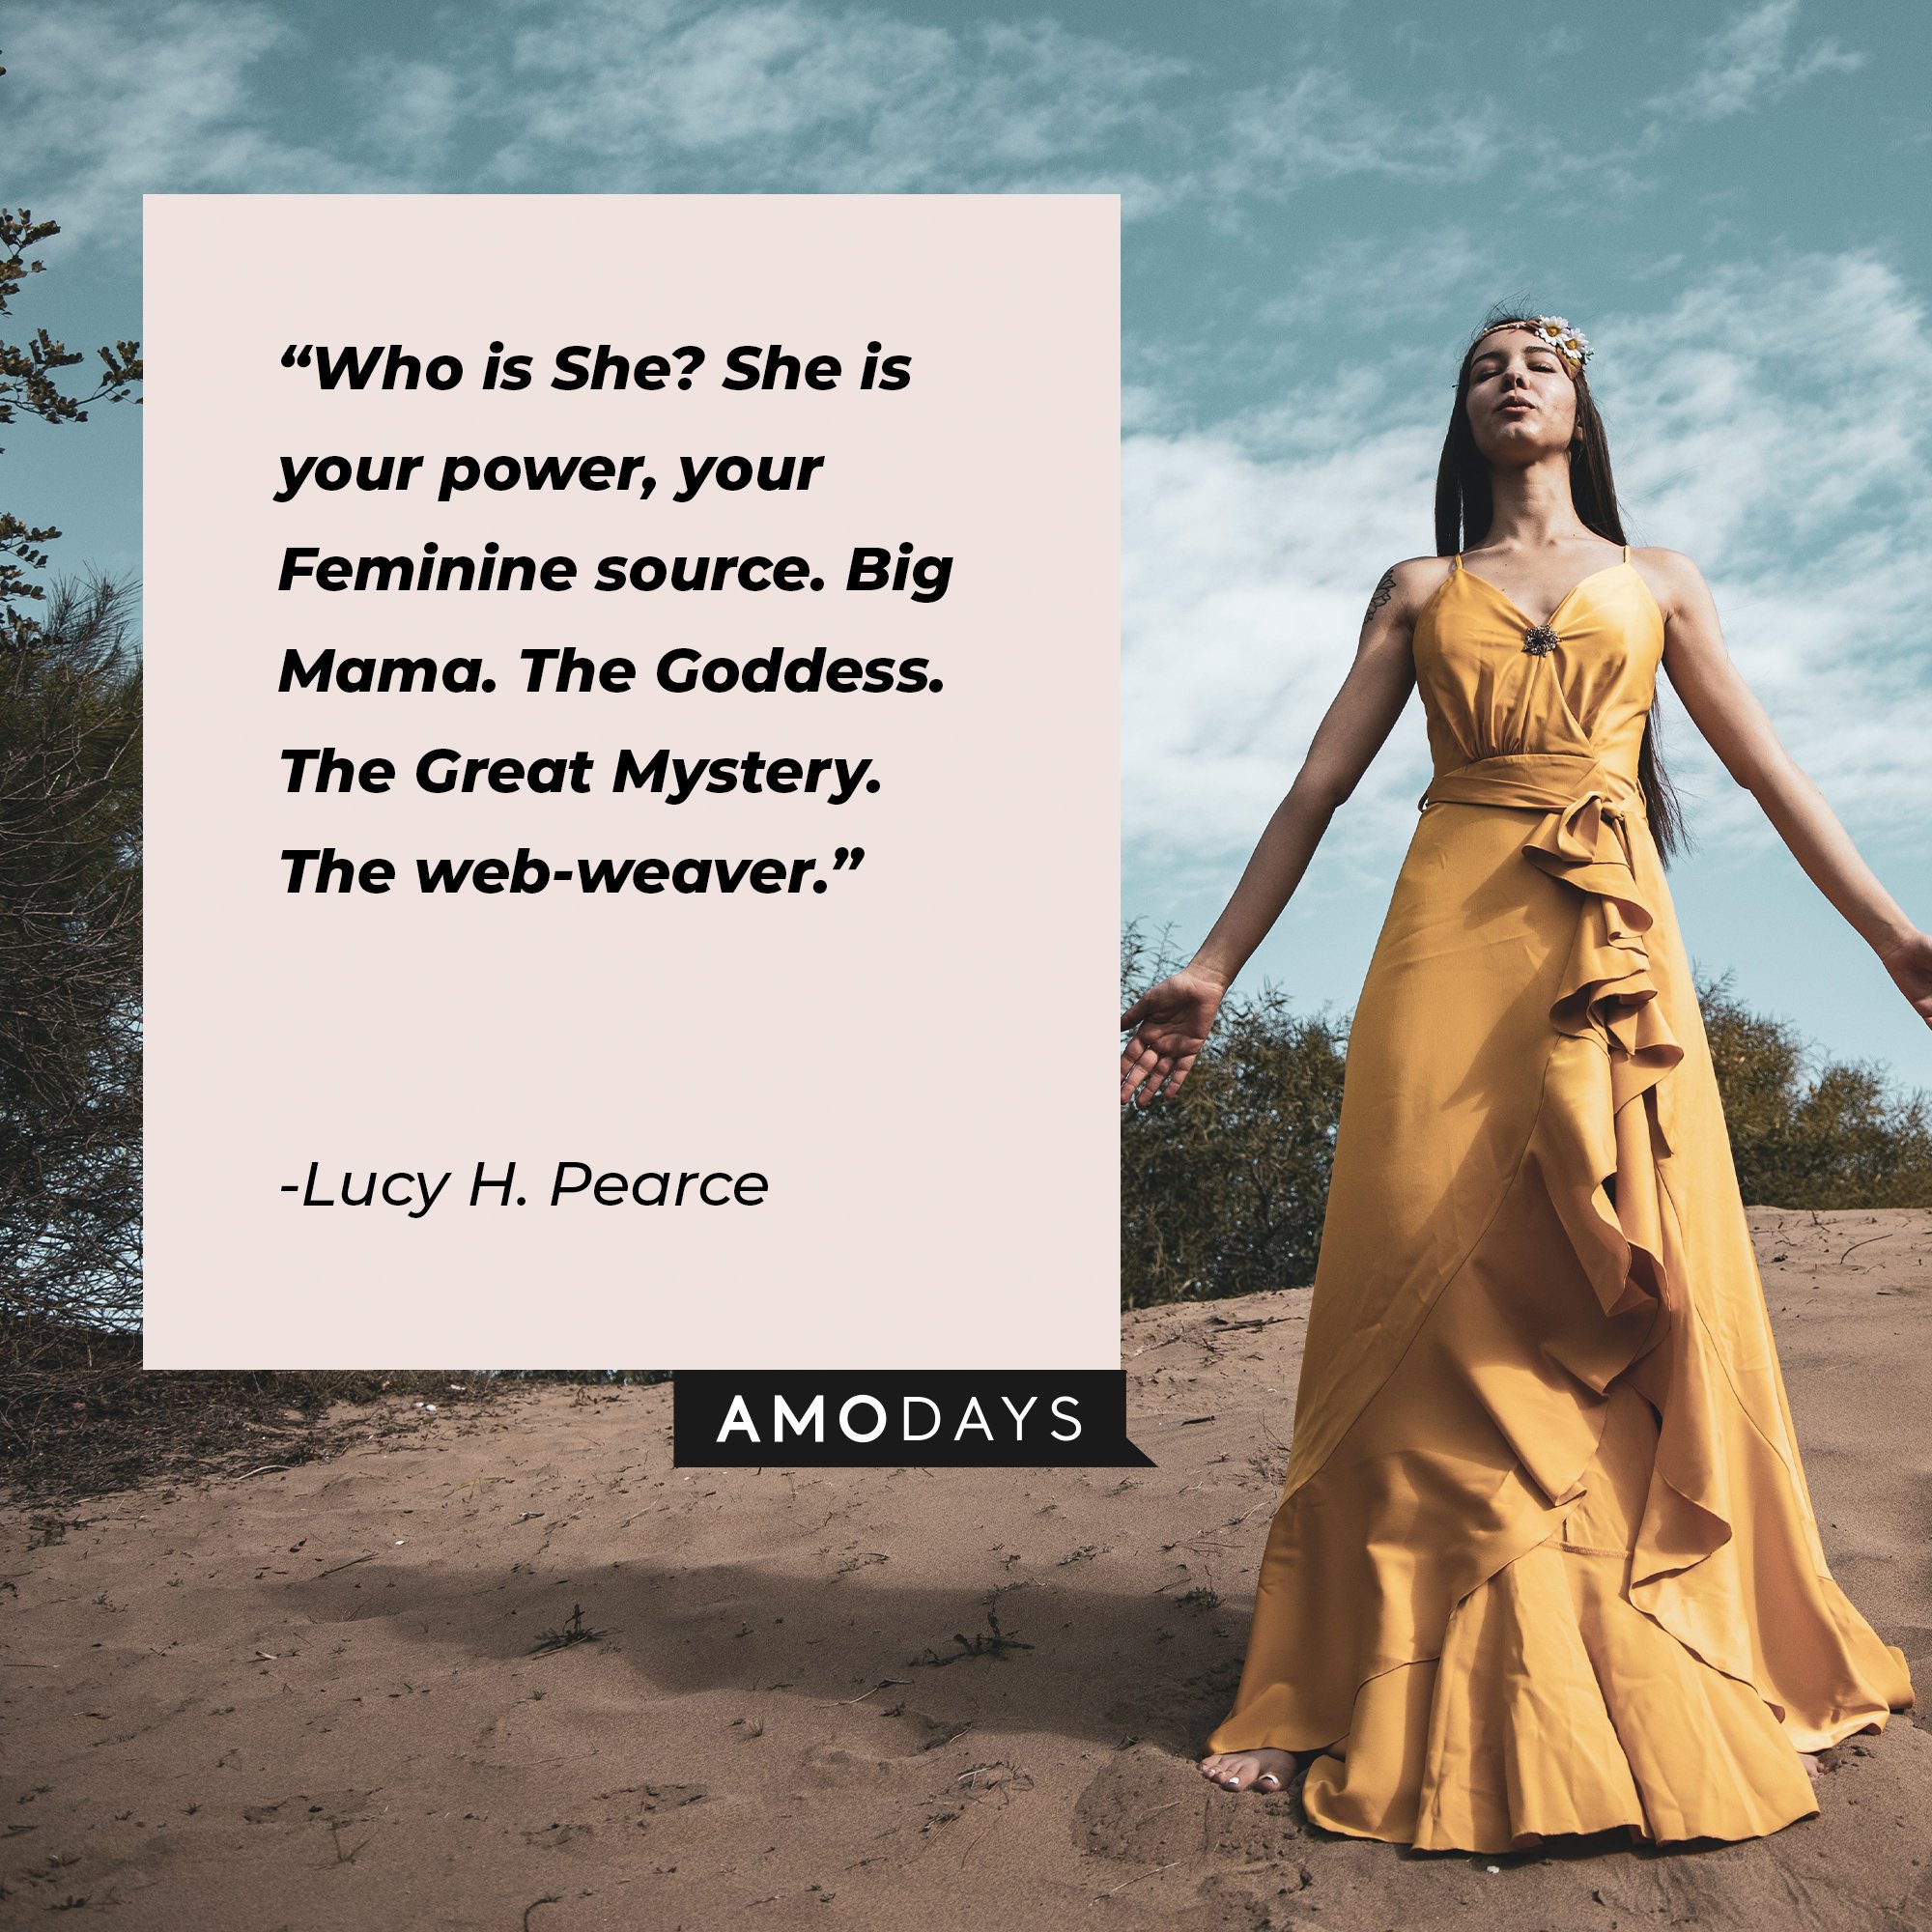  Lucy H. Pearce’s quote: "Who is She? She is your power, your Feminine source. Big Mama. The Goddess. The Great Mystery. The web-weaver." | Image: AmoDays